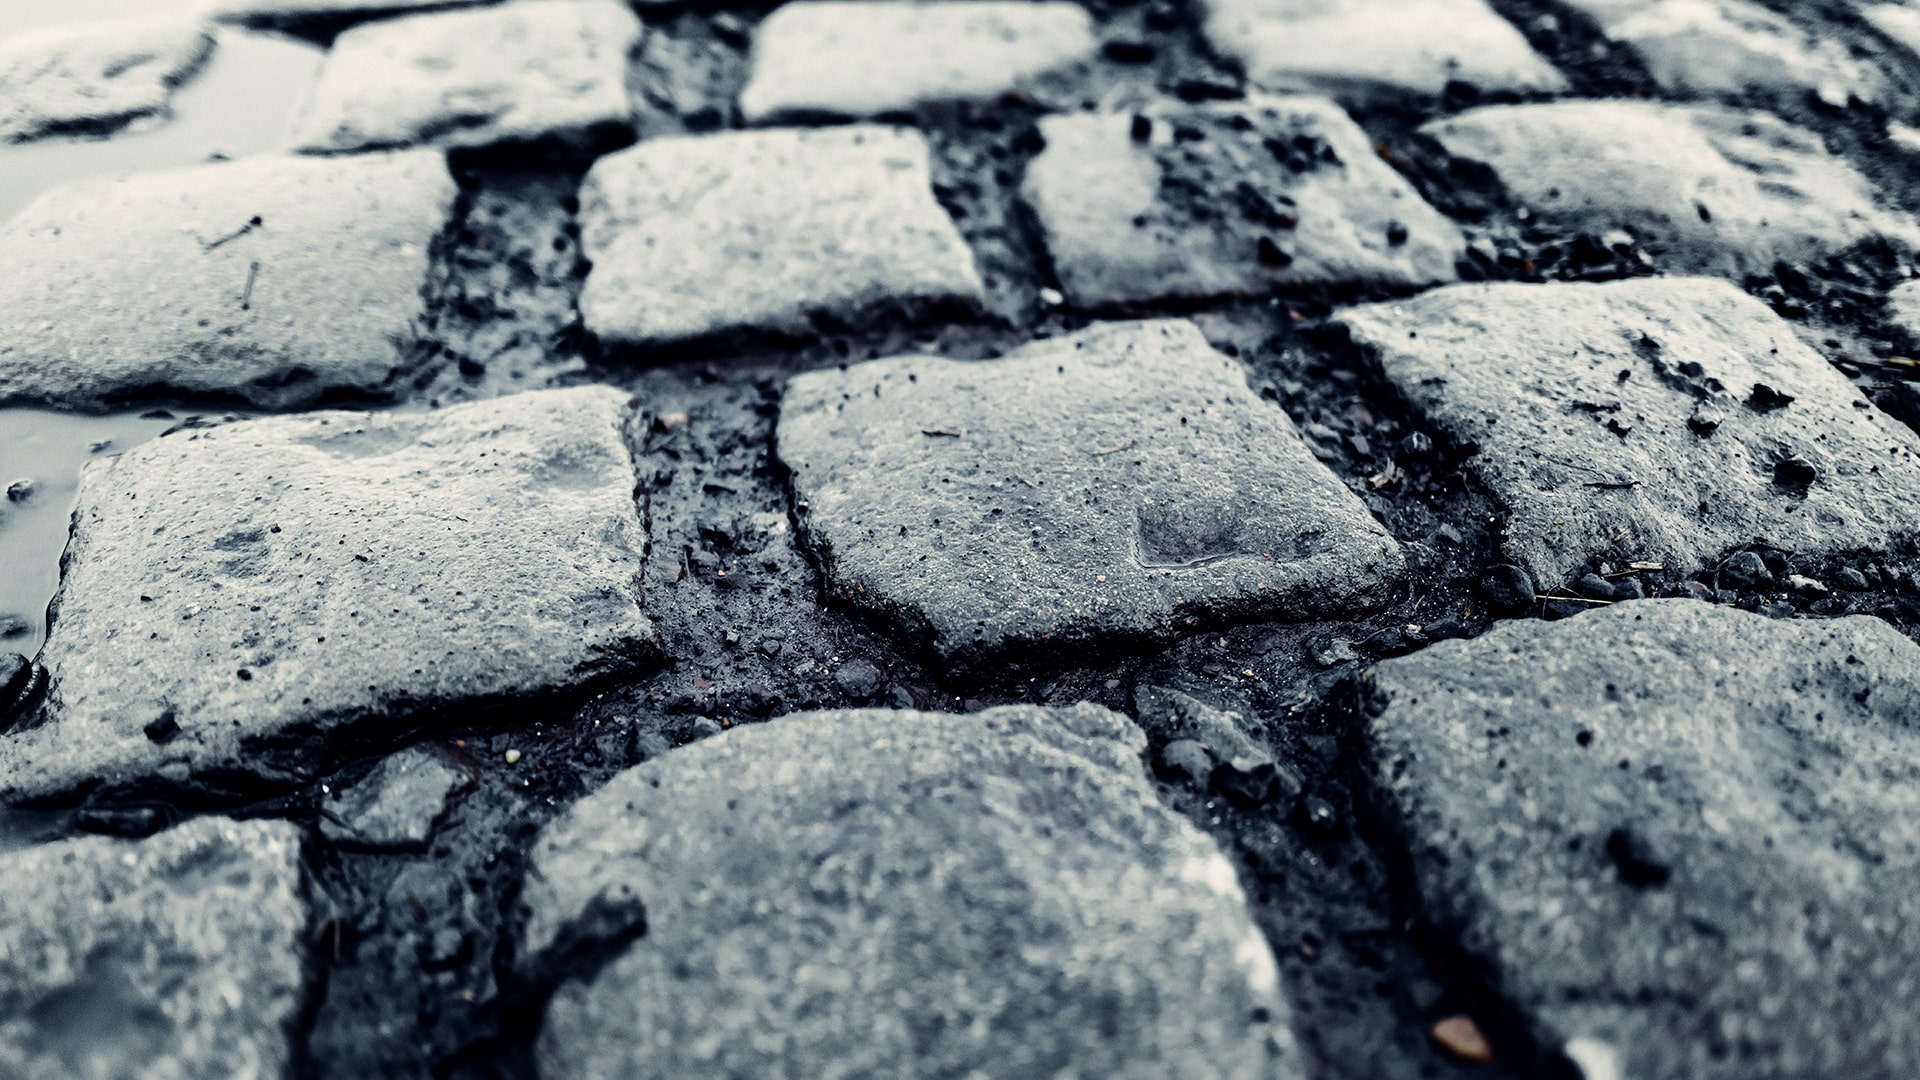 The postponement of the Paris–Roubaix only increases its significance. Daniele Bennati describes his experience on the cobbles of both the Paris–Roubaix and the Tour of Flanders.